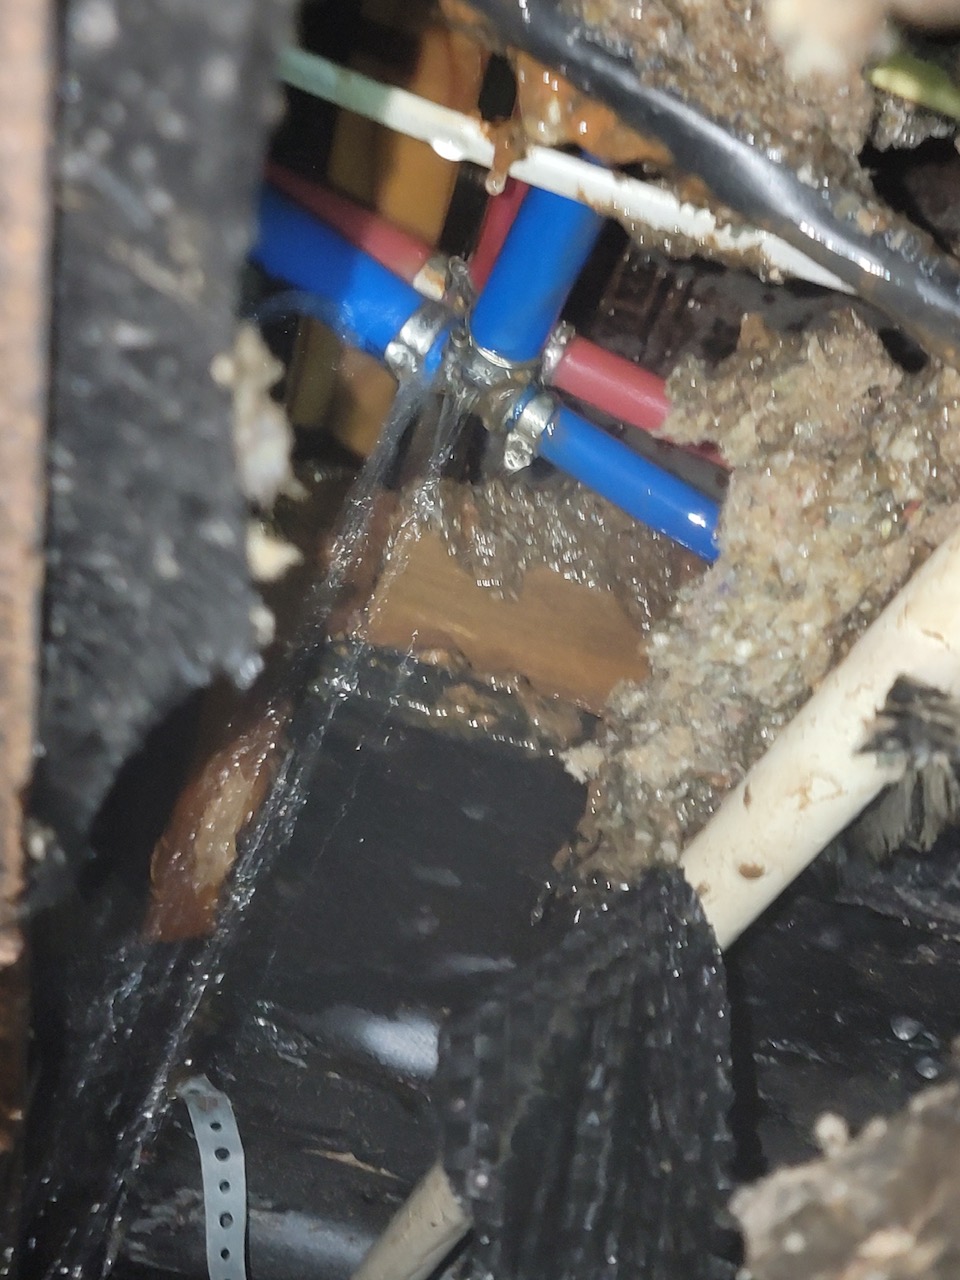 Image of pex pipe with a leak in it under a house